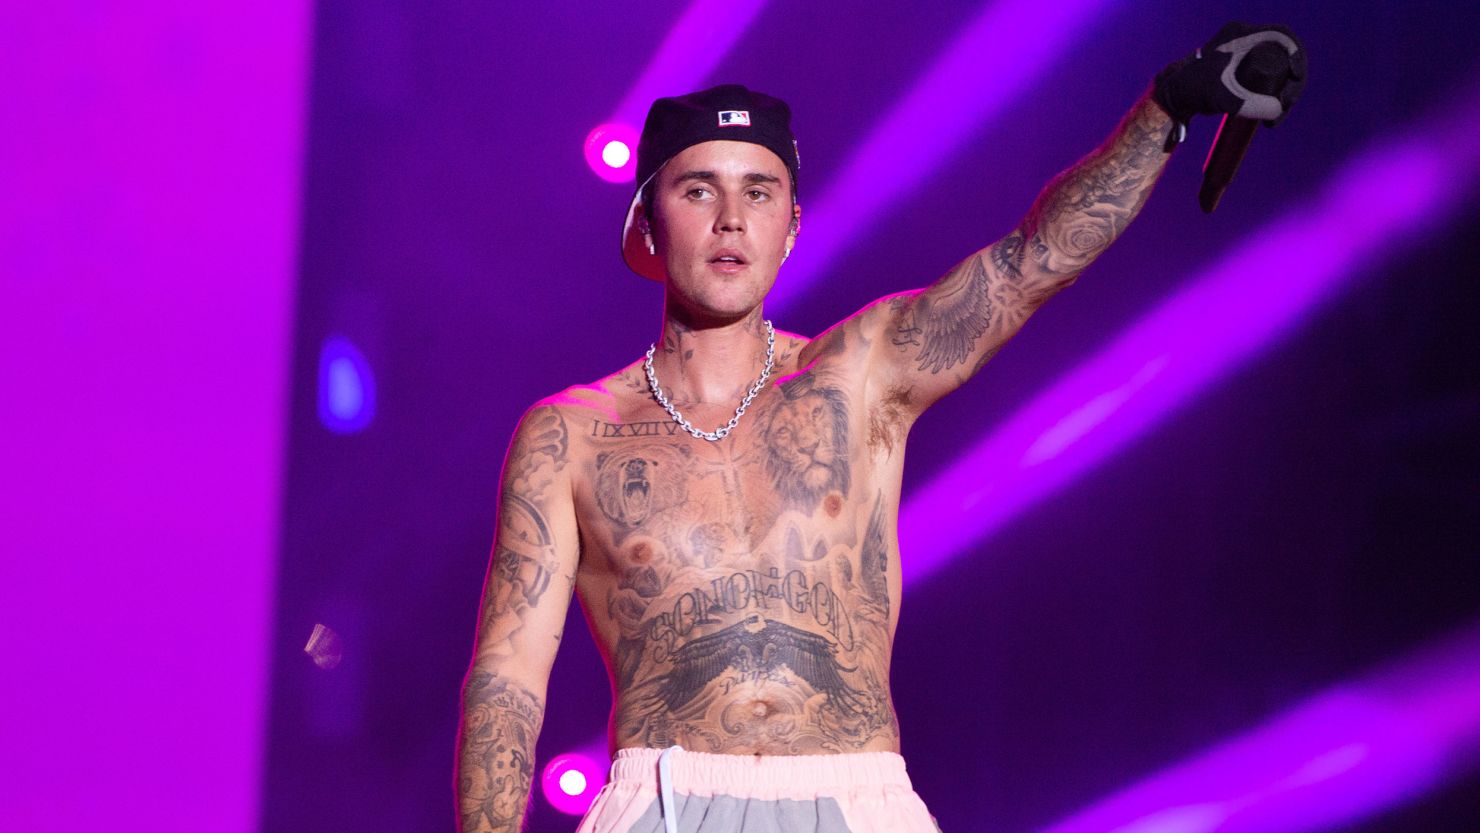 Justin Bieber, seen here performing on day three of Sziget Festival 2022 on Óbudai-sziget Island on August 12, 2022 in Budapest, Hungary, has announced he will take another break from touring. 